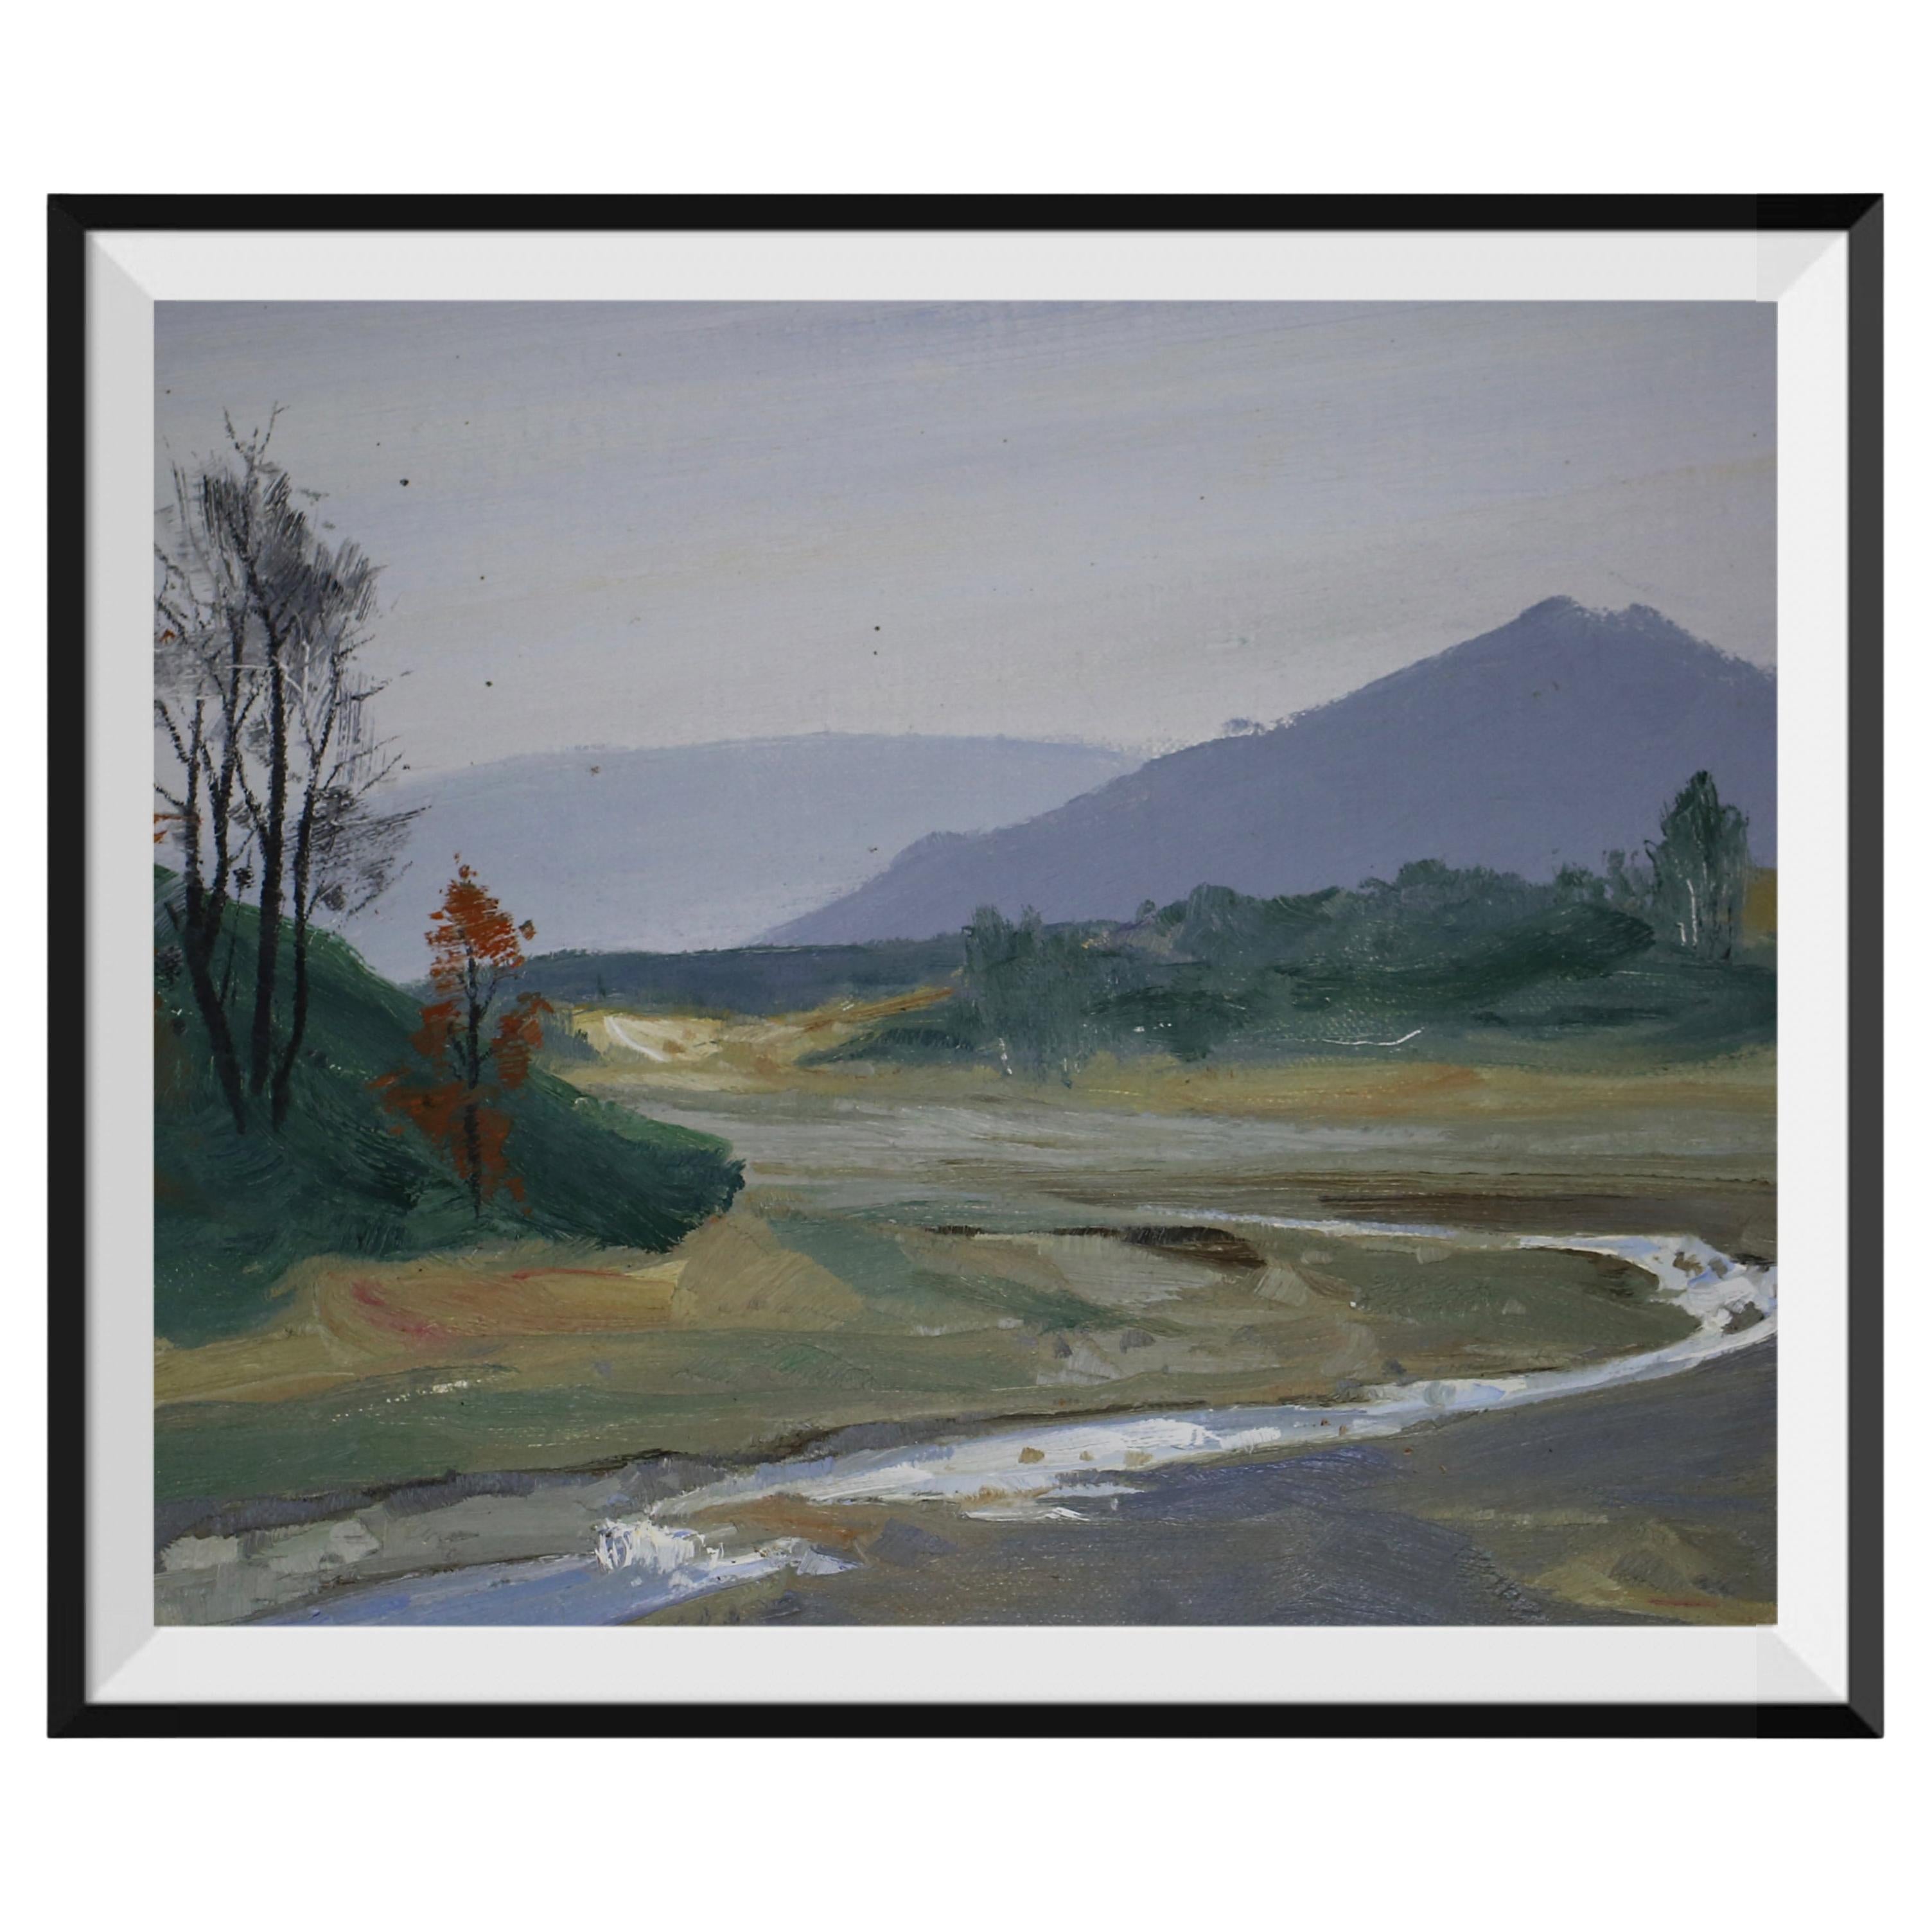 "Lost in Countryside" Series with Black Metallic Frame